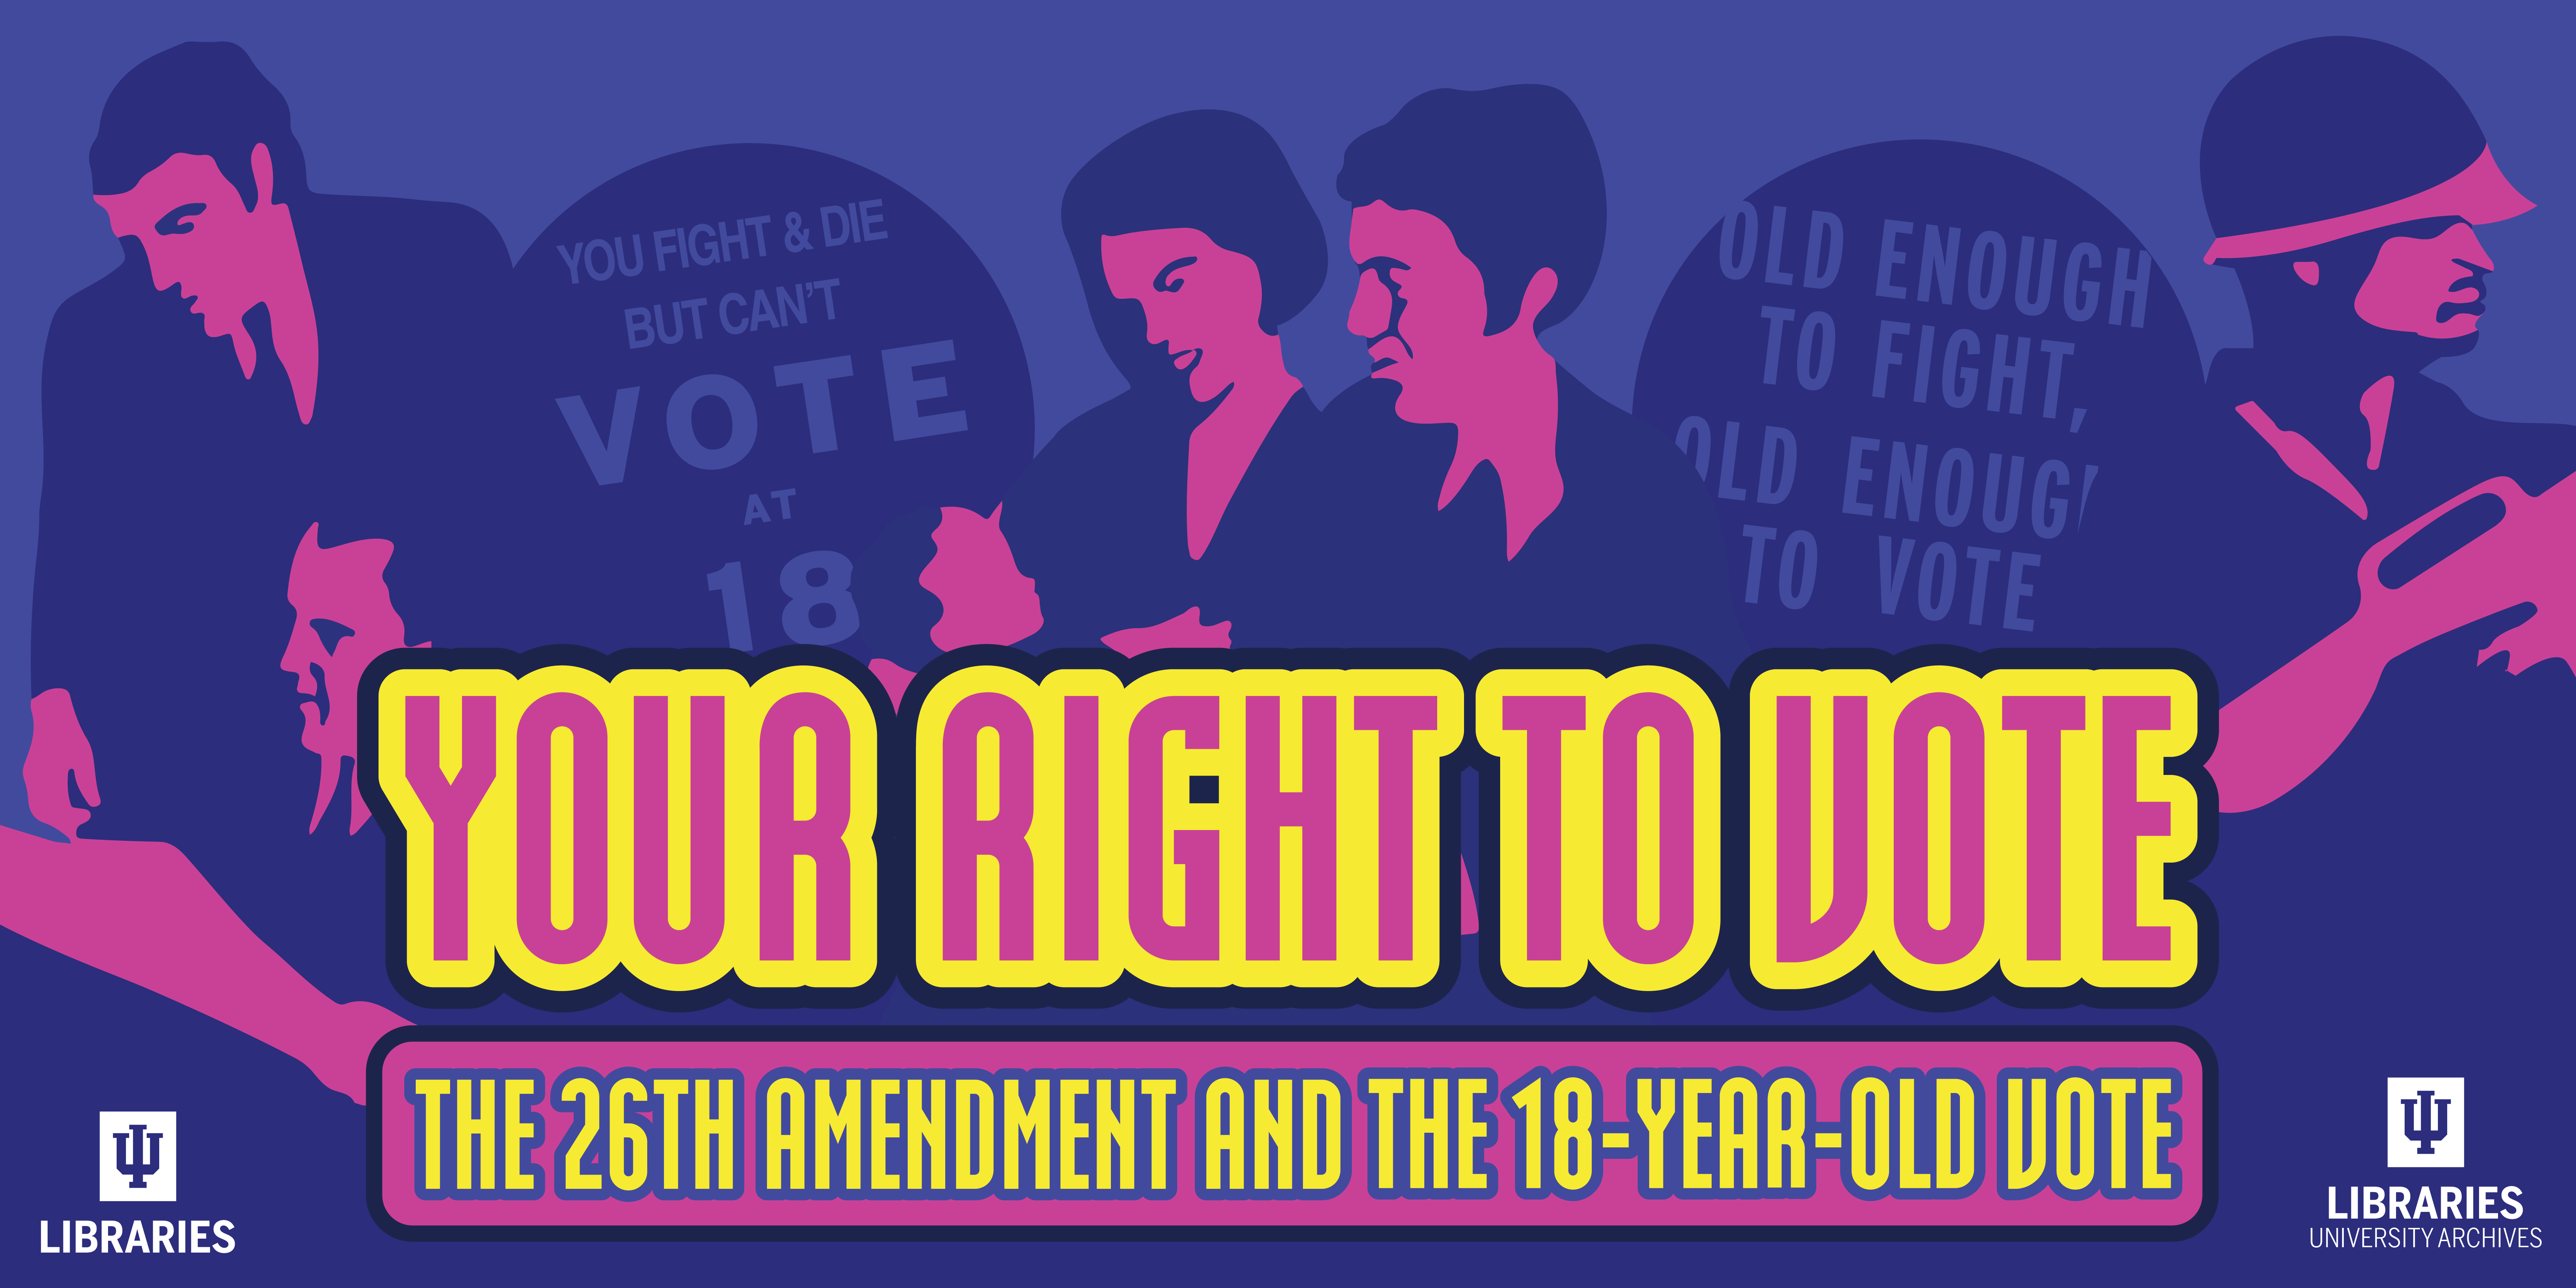 Your Right to Vote: The 26th Amendment and the 18-Year-Old Vote